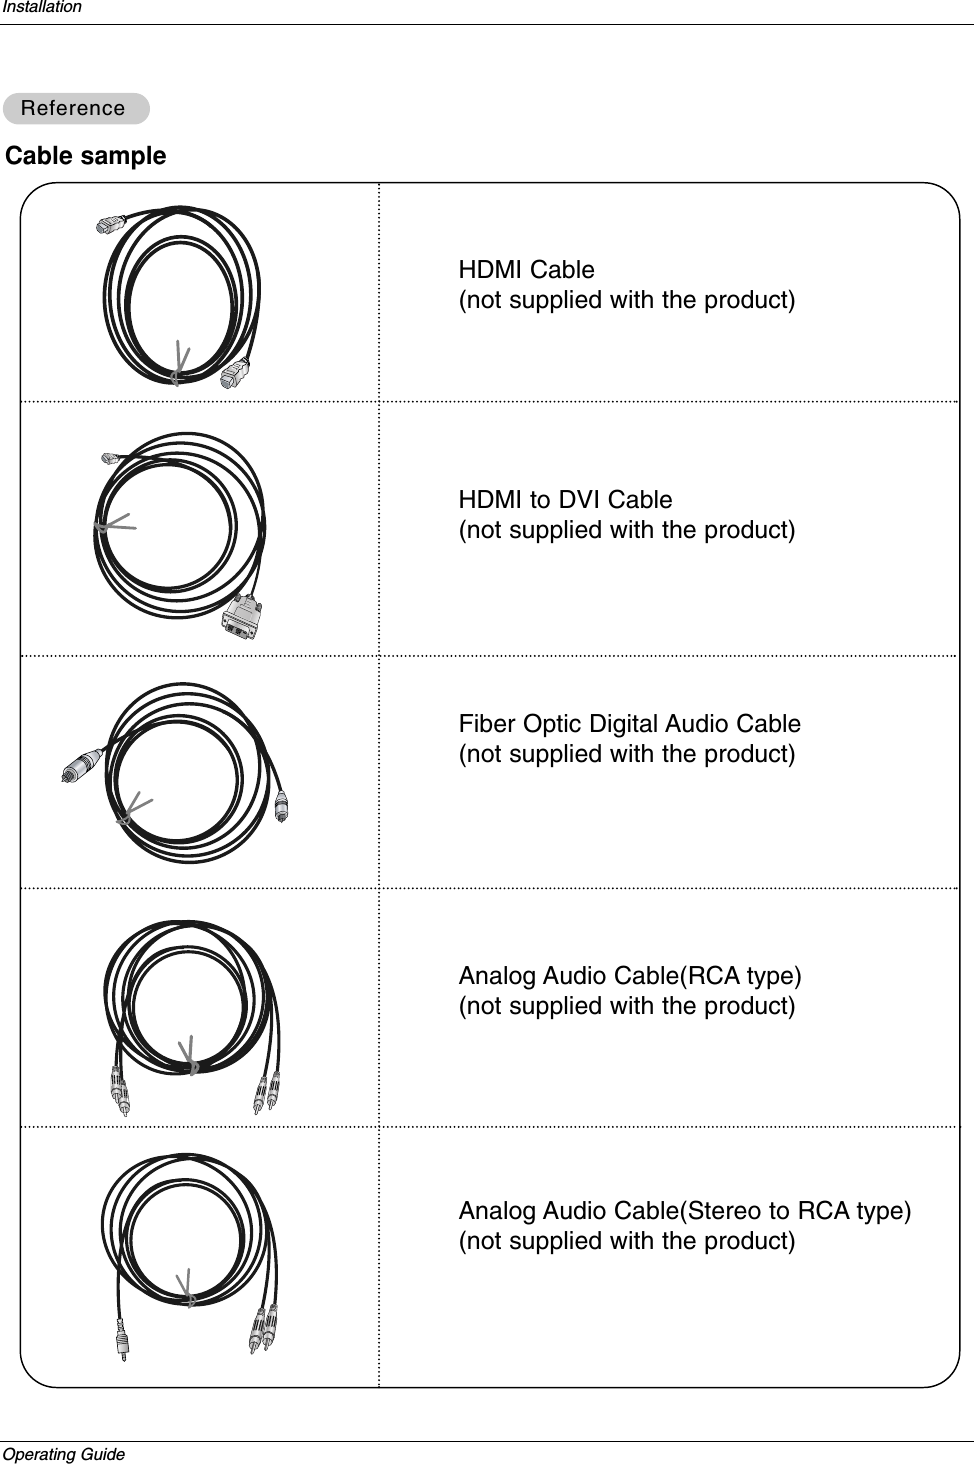 Operating GuideInstallationCable sampleHDMI Cable (not supplied with the product)HDMI to DVI Cable (not supplied with the product)Fiber Optic Digital Audio Cable(not supplied with the product)Analog Audio Cable(RCA type)(not supplied with the product)Analog Audio Cable(Stereo to RCA type)(not supplied with the product)ReferenceReference